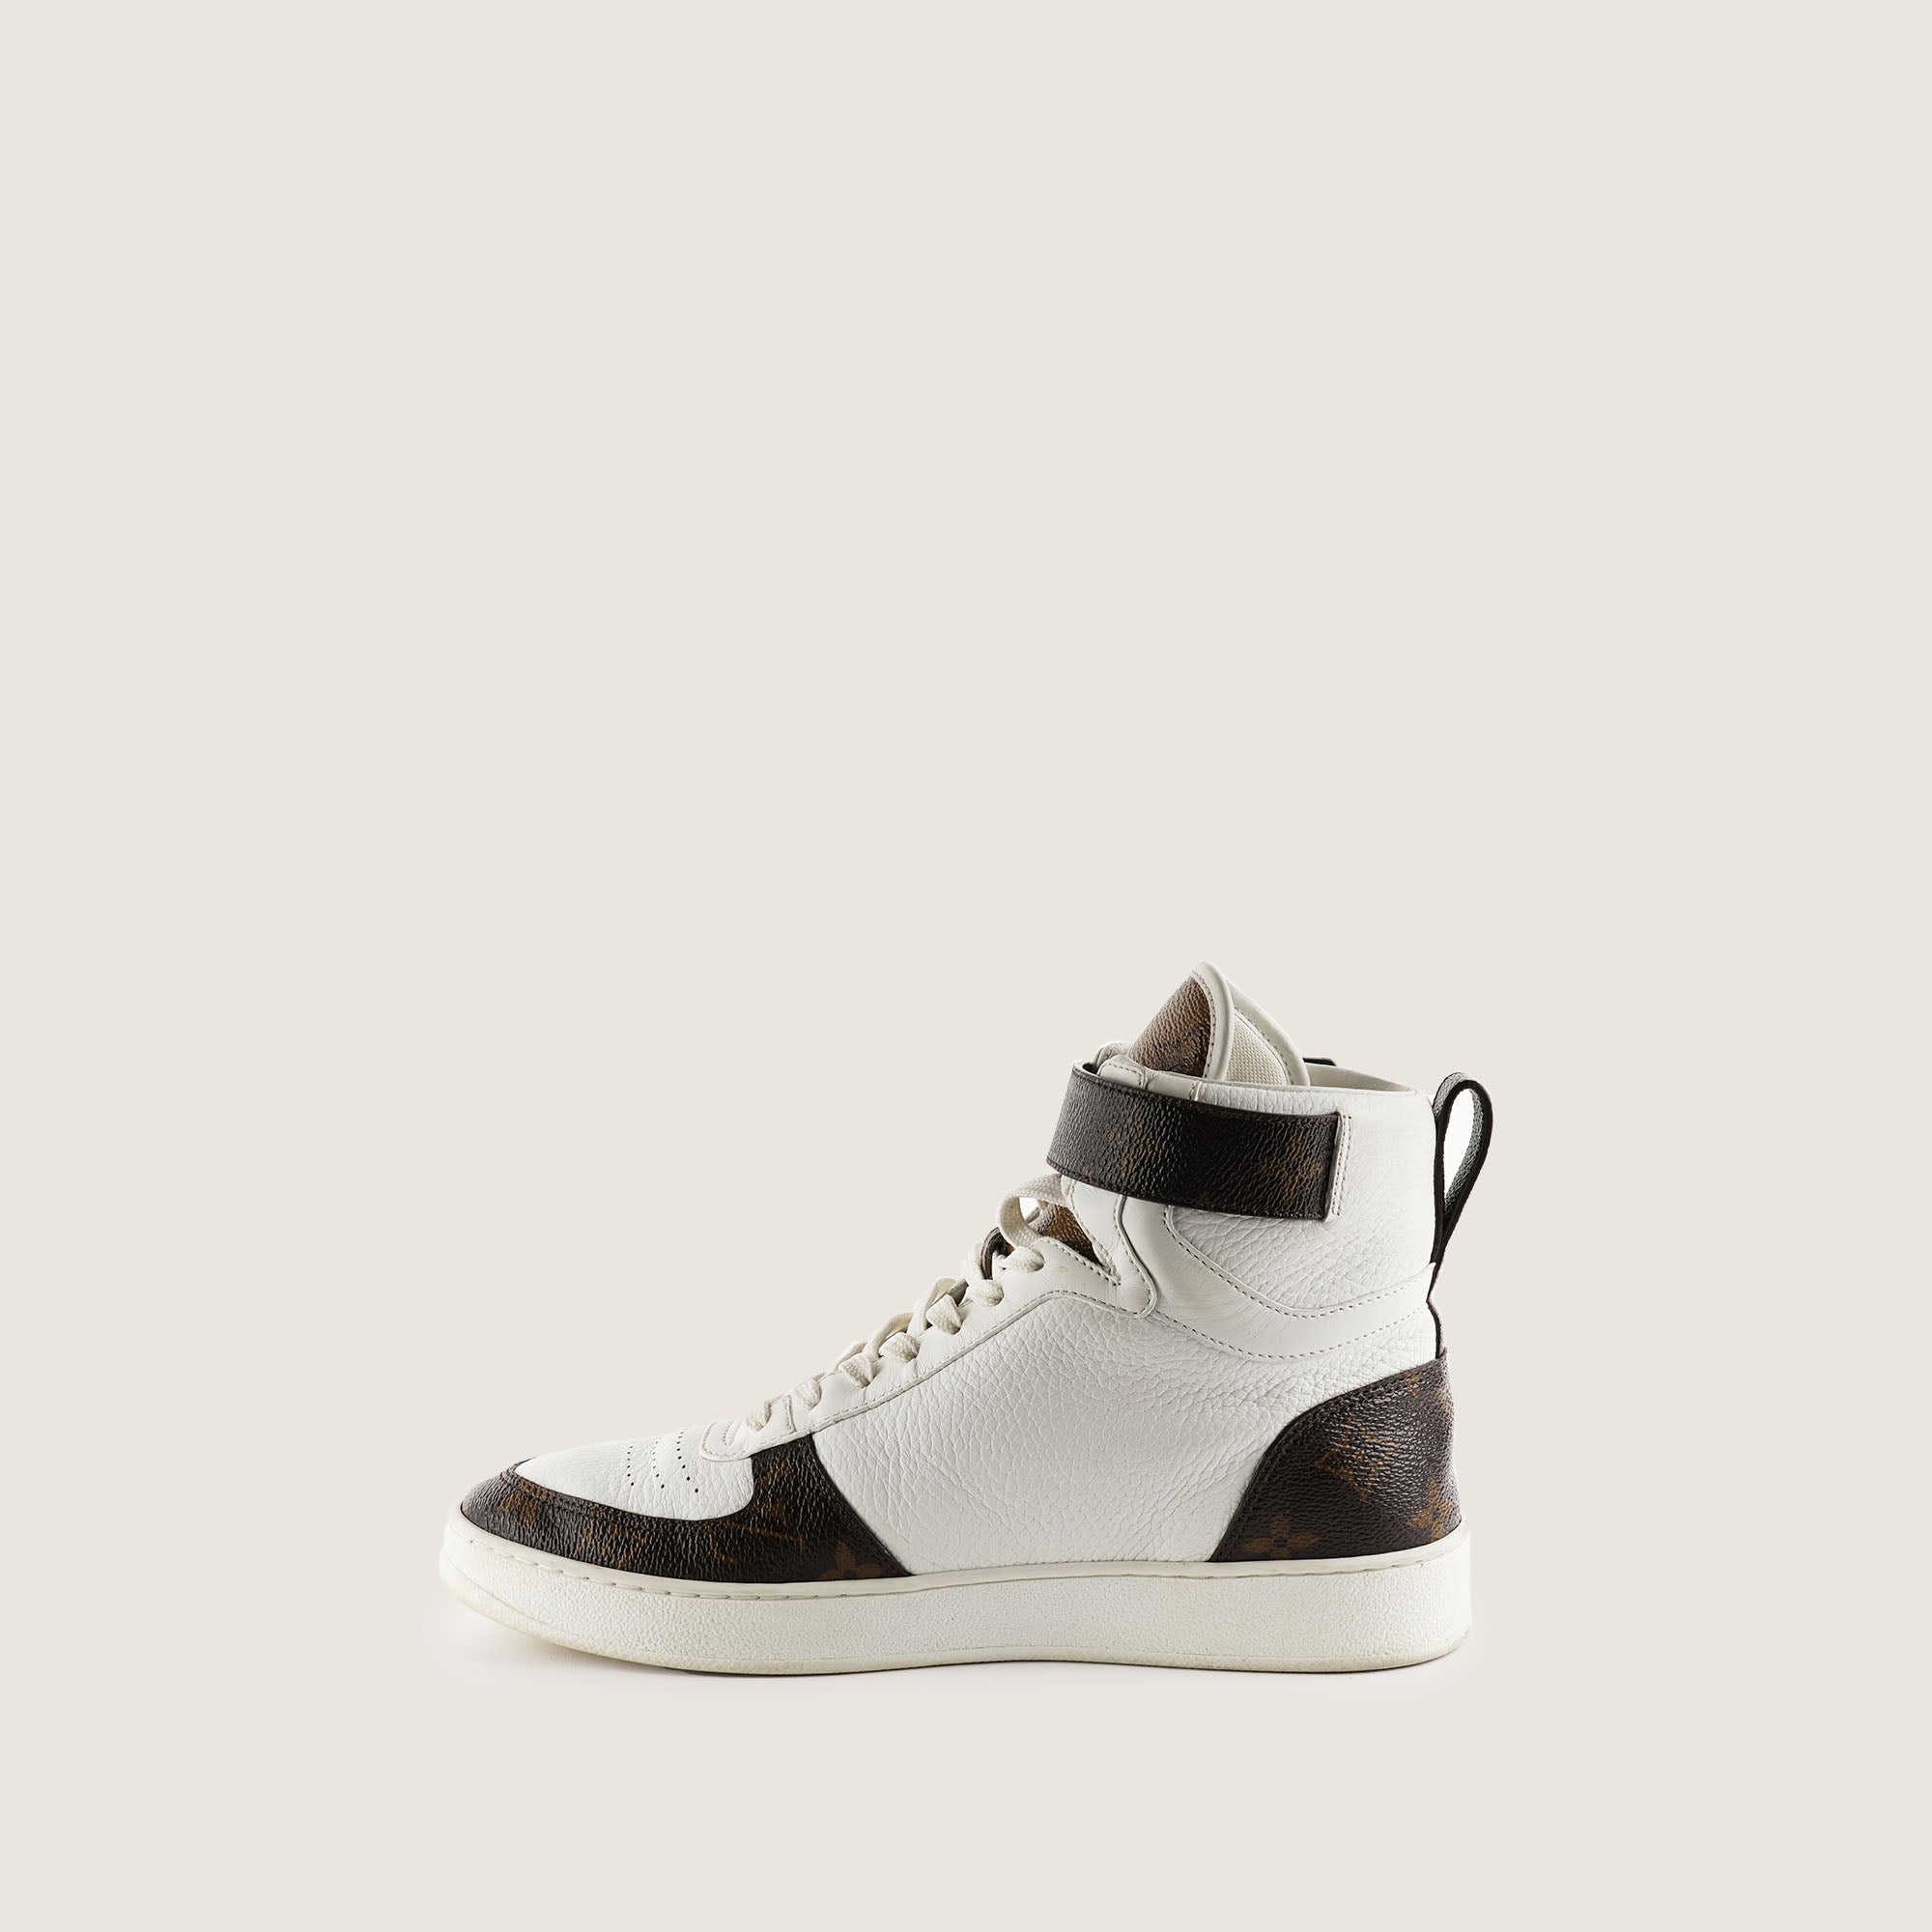 Boombox Sneaker Boot 38 - LOUIS VUITTON - Affordable Luxury